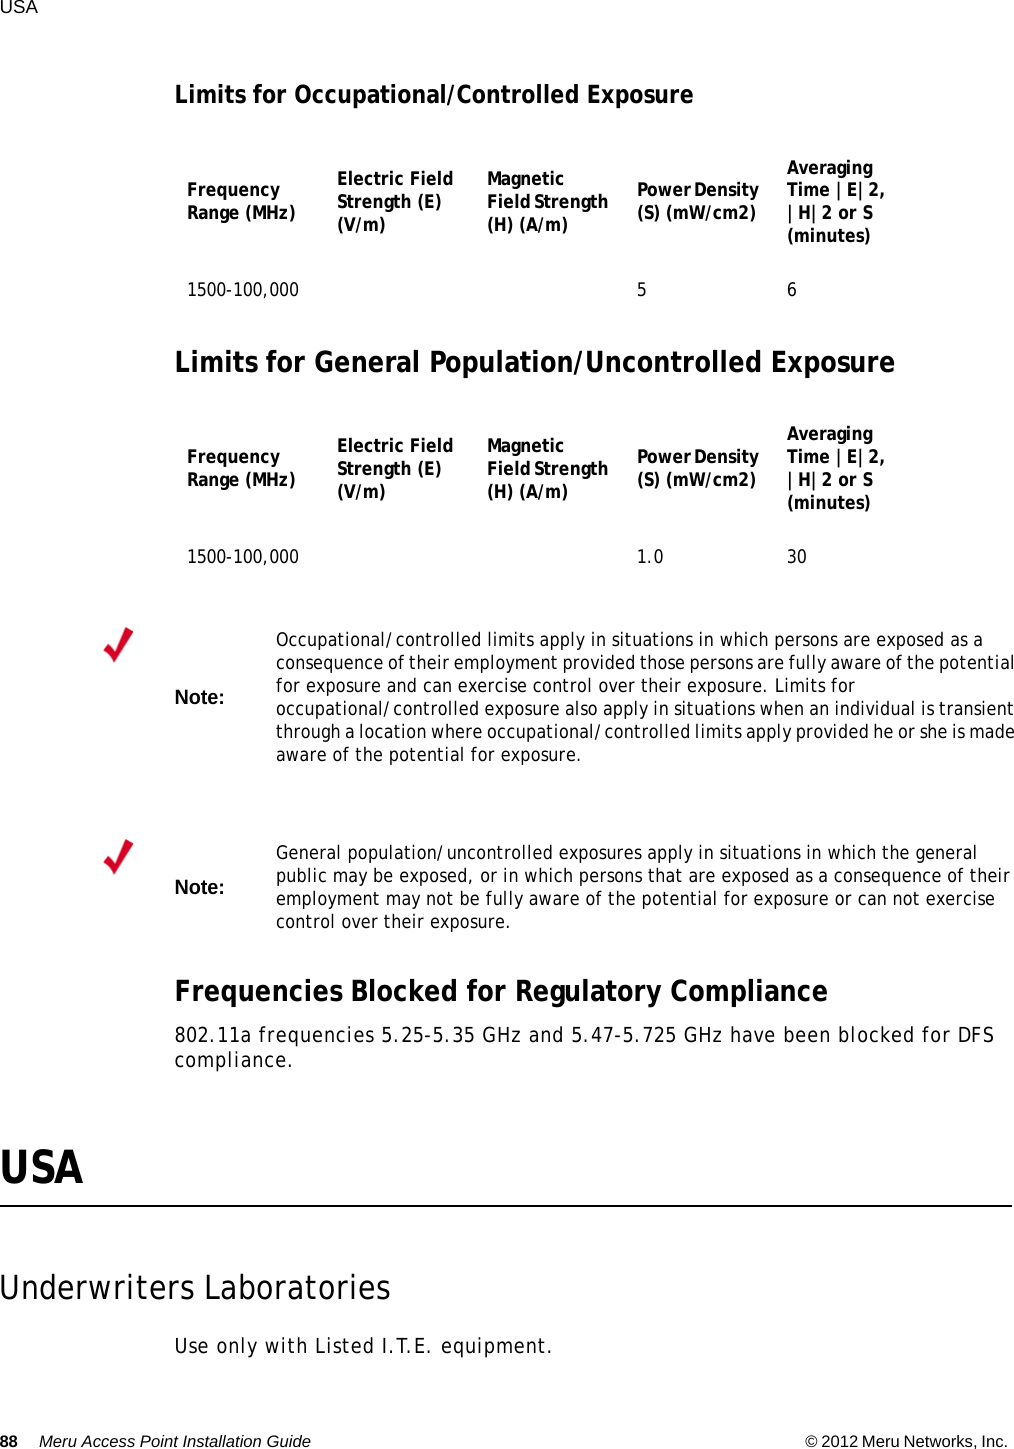 88 Meru Access Point Installation Guide © 2012 Meru Networks, Inc. USA Limits for Occupational/Controlled ExposureLimits for General Population/Uncontrolled ExposureFrequencies Blocked for Regulatory Compliance802.11a frequencies 5.25-5.35 GHz and 5.47-5.725 GHz have been blocked for DFS compliance.USAUnderwriters LaboratoriesUse only with Listed I.T.E. equipment.Frequency Range (MHz) Electric Field Strength (E) (V/m) Magnetic Field Strength (H) (A/m)Power Density (S) (mW/cm2)Averaging Time |E|2, |H|2 or S (minutes)1500-100,000 5 6Frequency Range (MHz) Electric Field Strength (E) (V/m) Magnetic Field Strength (H) (A/m)Power Density (S) (mW/cm2)Averaging Time |E|2, |H|2 or S (minutes)1500-100,000 1.0 30Note:Occupational/controlled limits apply in situations in which persons are exposed as a consequence of their employment provided those persons are fully aware of the potential for exposure and can exercise control over their exposure. Limits for occupational/controlled exposure also apply in situations when an individual is transient through a location where occupational/controlled limits apply provided he or she is made aware of the potential for exposure. Note:General population/uncontrolled exposures apply in situations in which the general public may be exposed, or in which persons that are exposed as a consequence of their employment may not be fully aware of the potential for exposure or can not exercise control over their exposure.